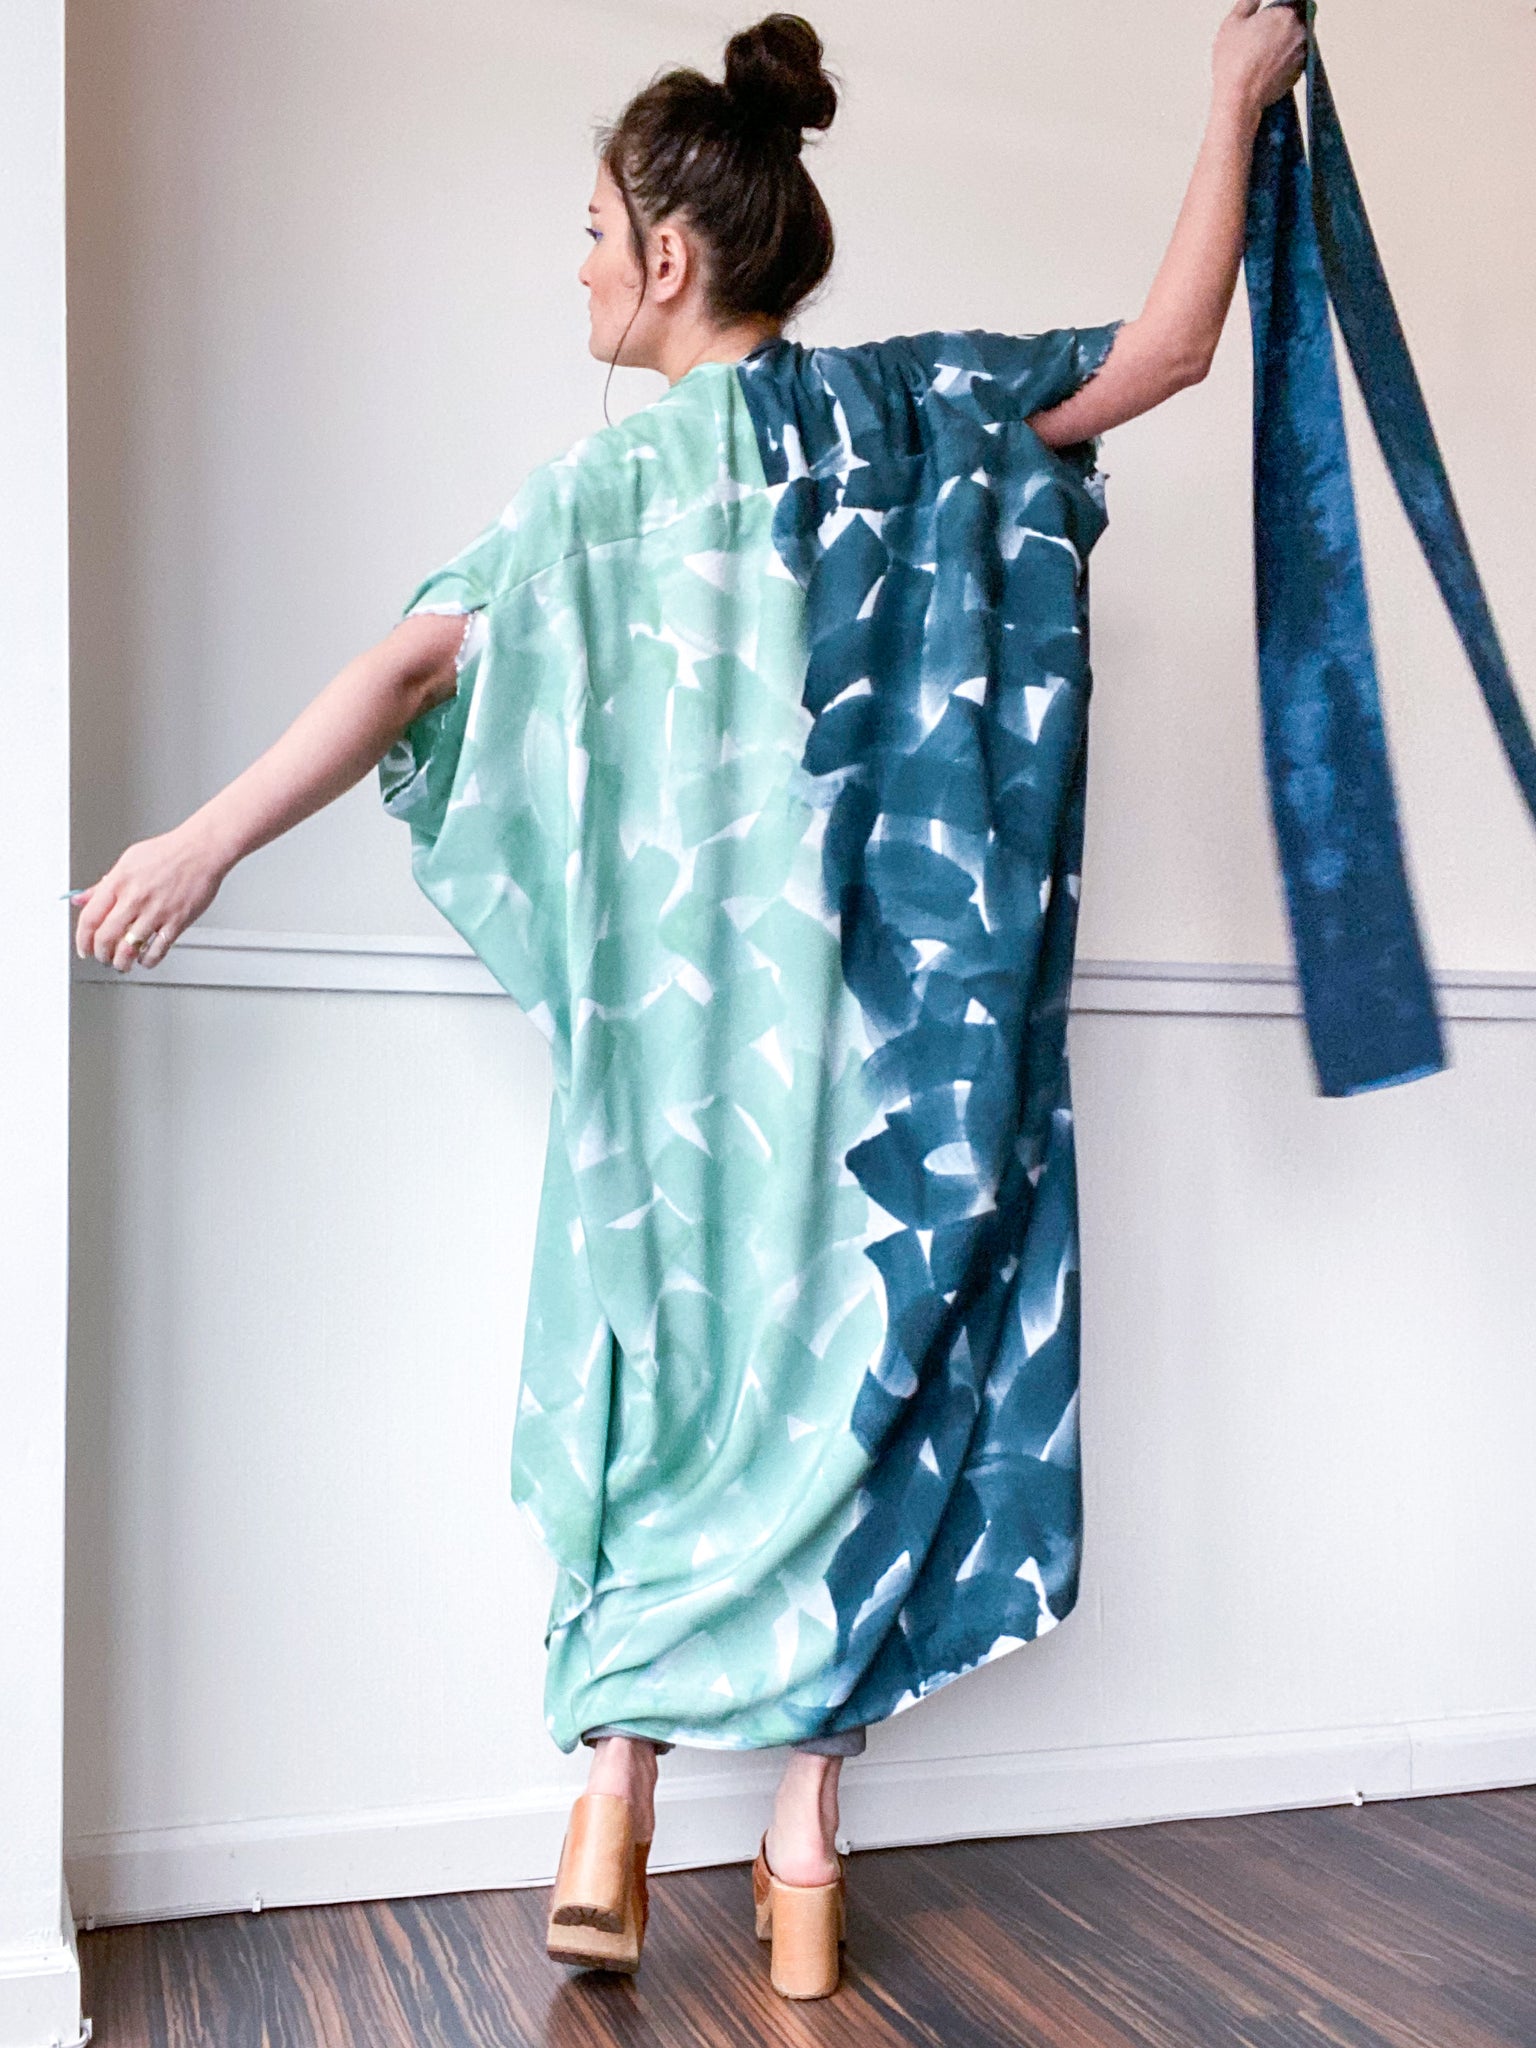 Limited Edition Hand-Dyed High Low Kimono Celadon Teal